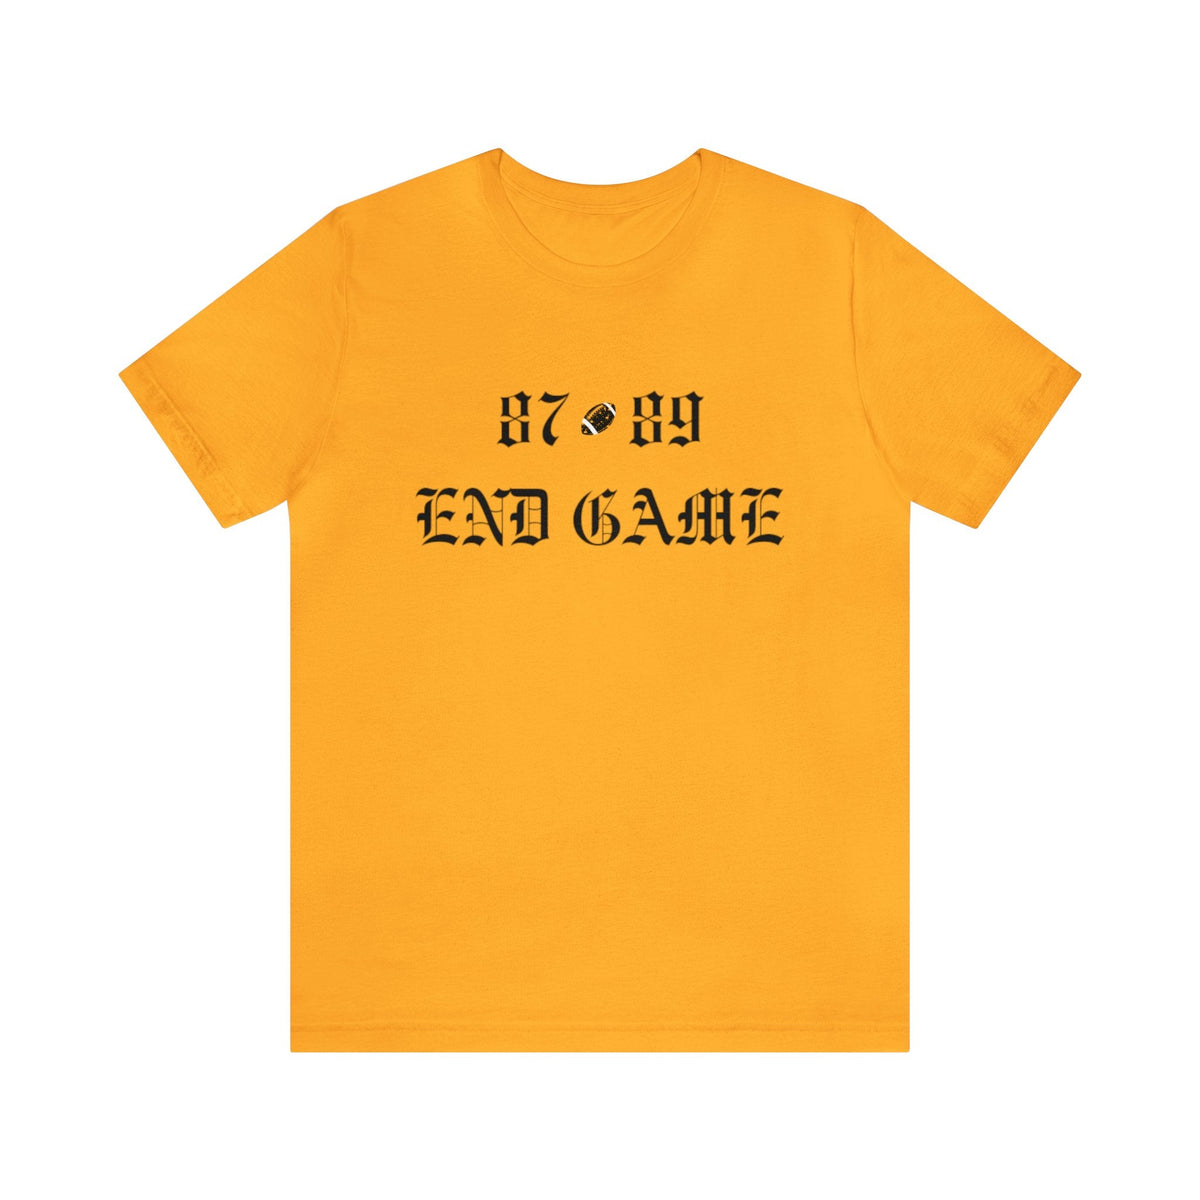 End Game 87 89 Short Sleeve Graphic Tee | 1989 T-shirt | Swiftie Shirt T-Shirt TheFringeCultureCollective